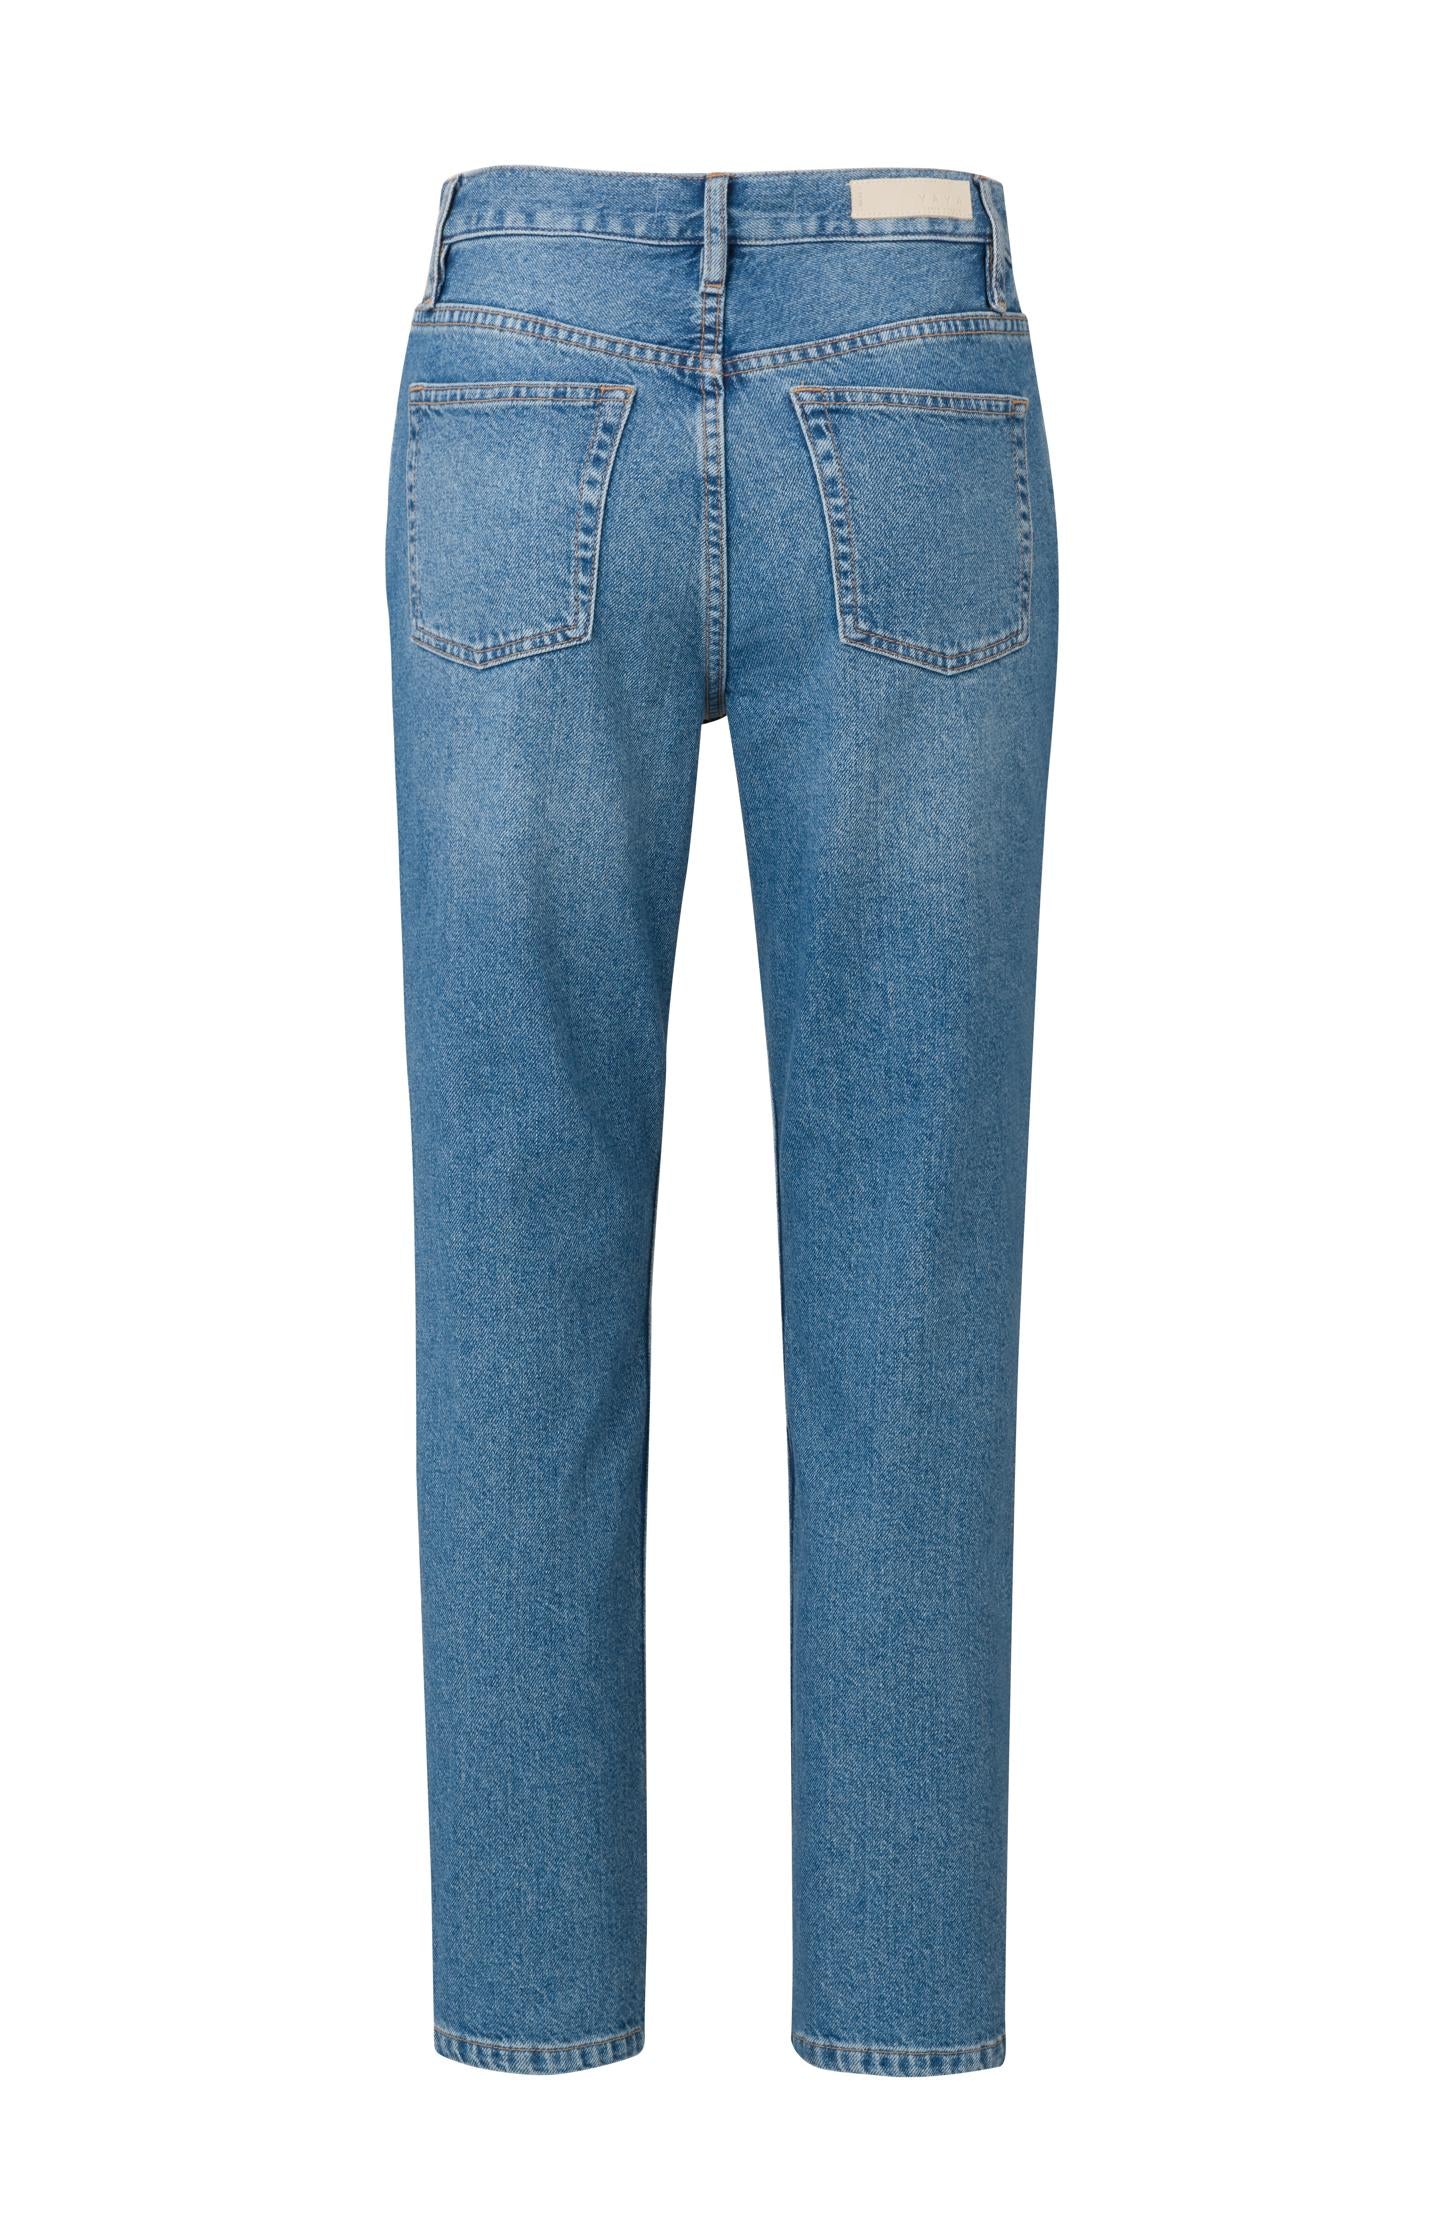 High waist denim trousers with straight leg and pockets